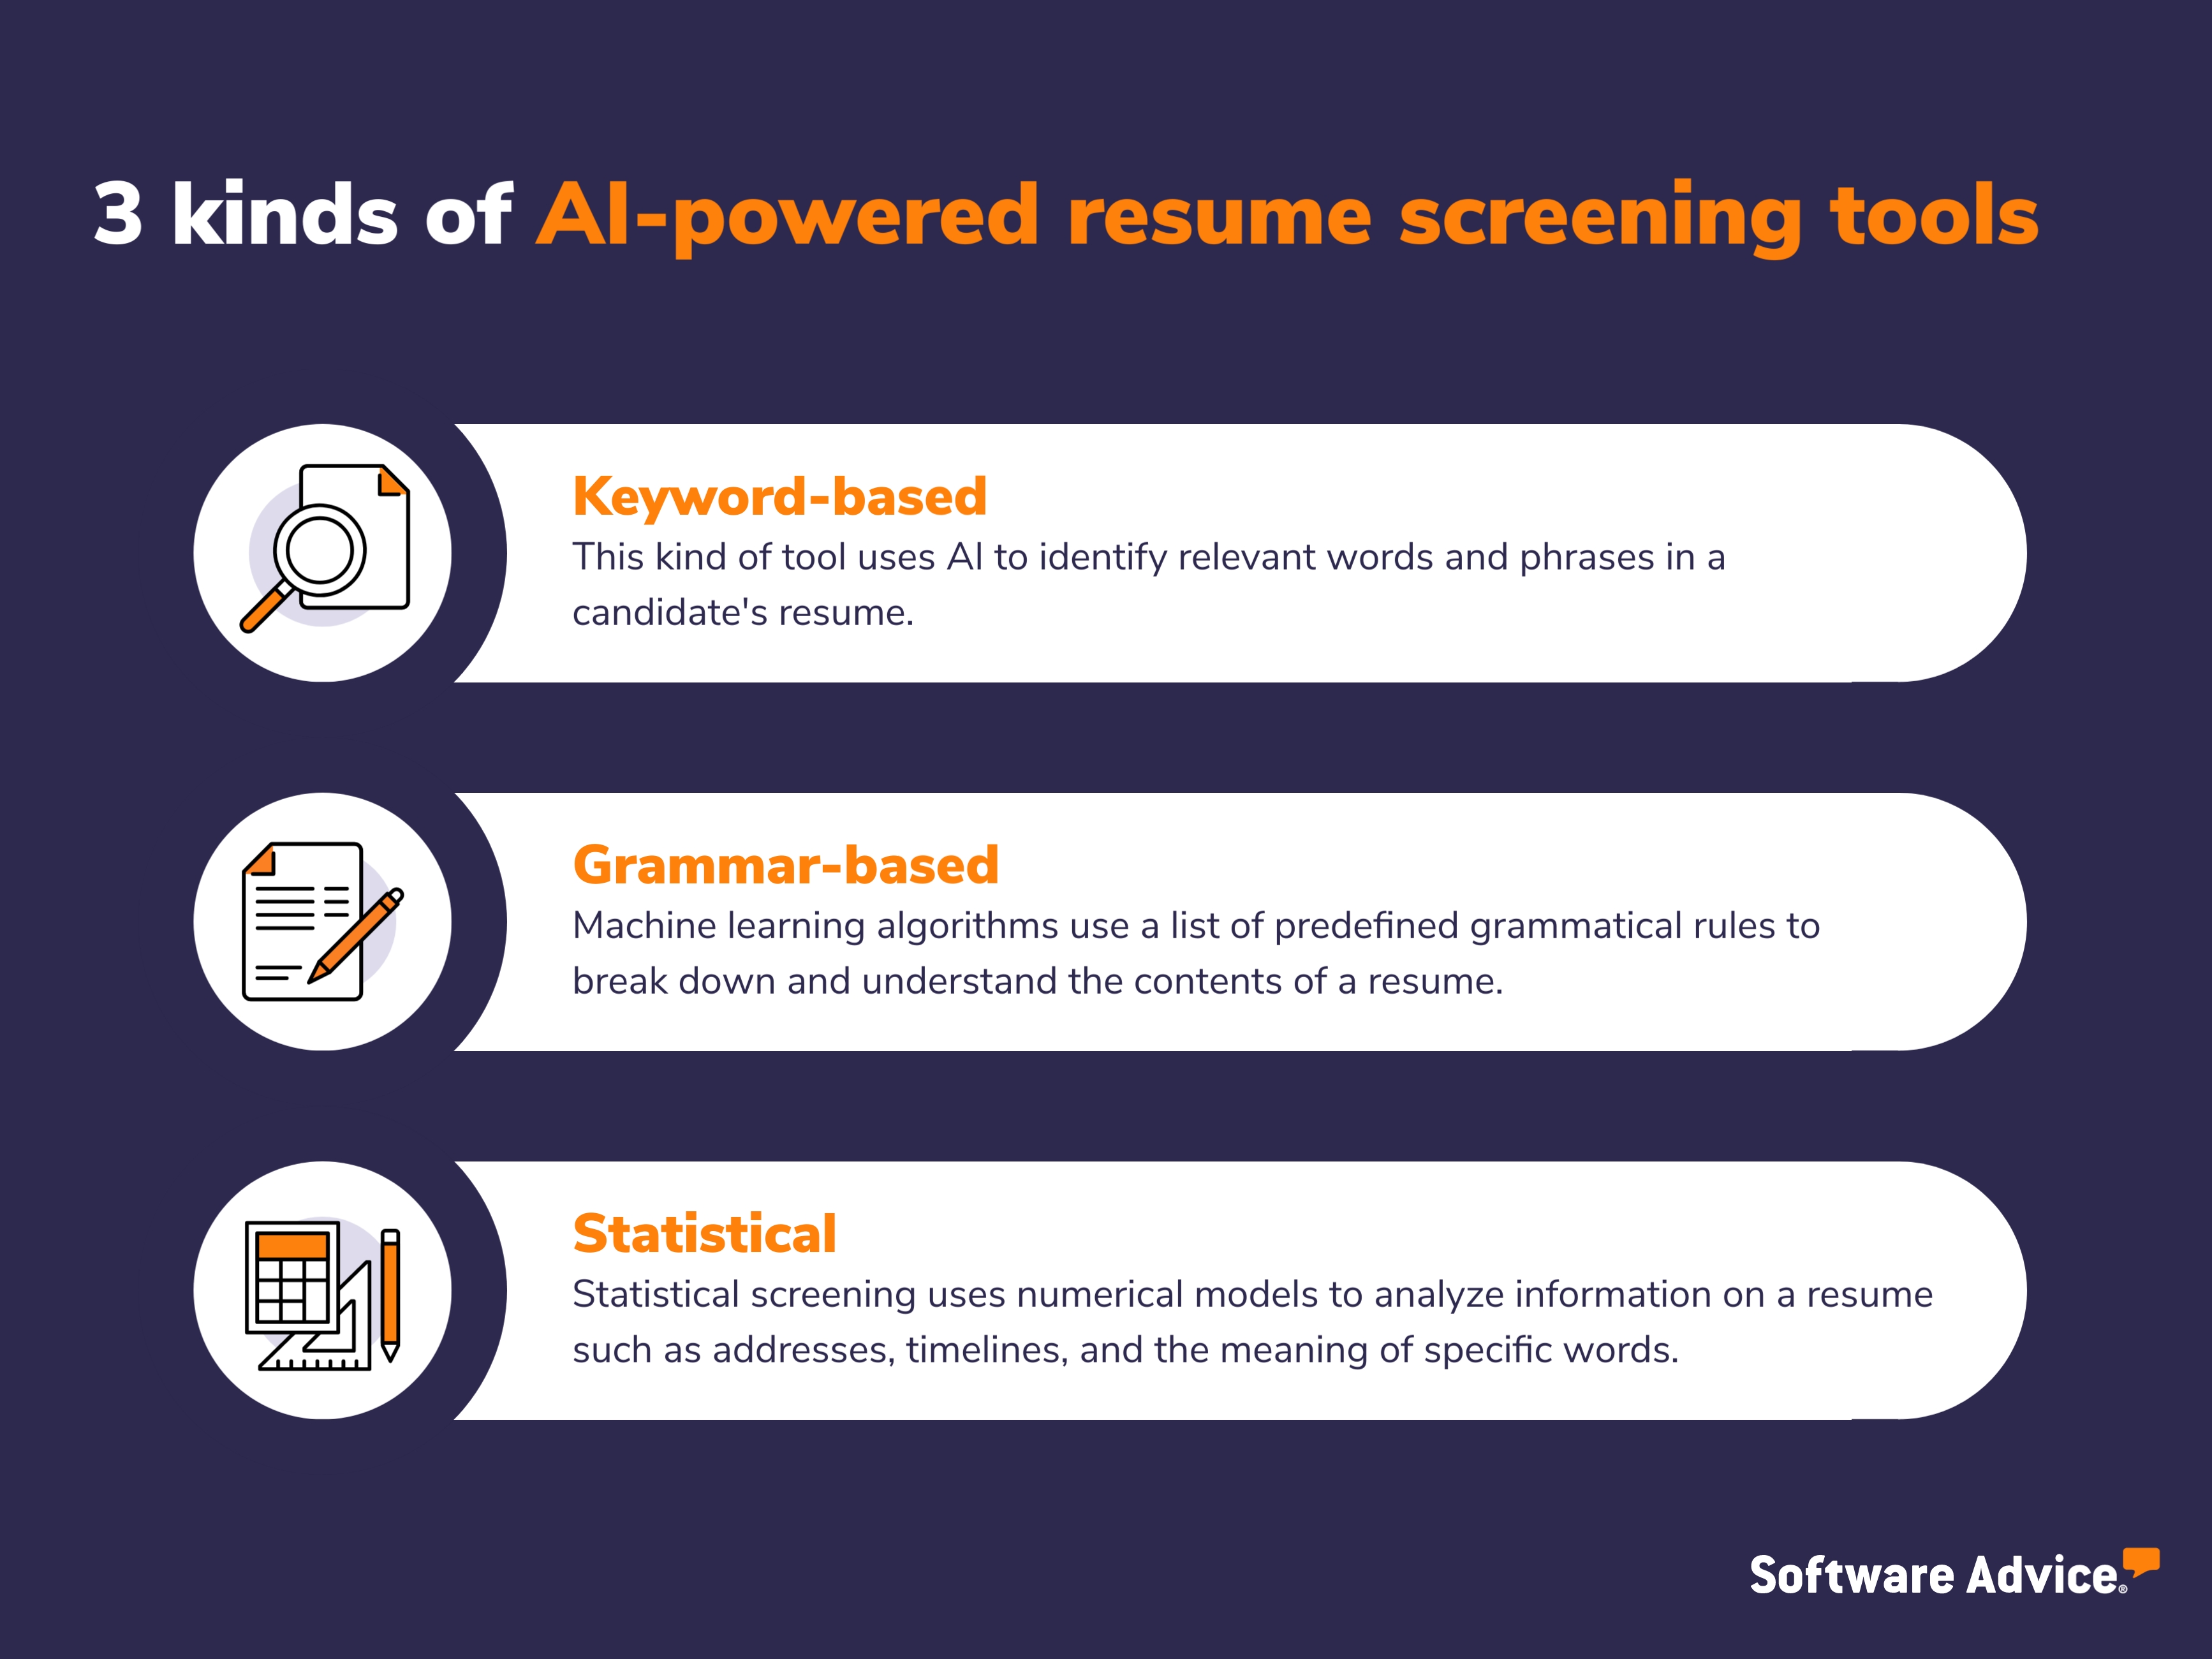 3 kinds of AI-powered resume screening tools